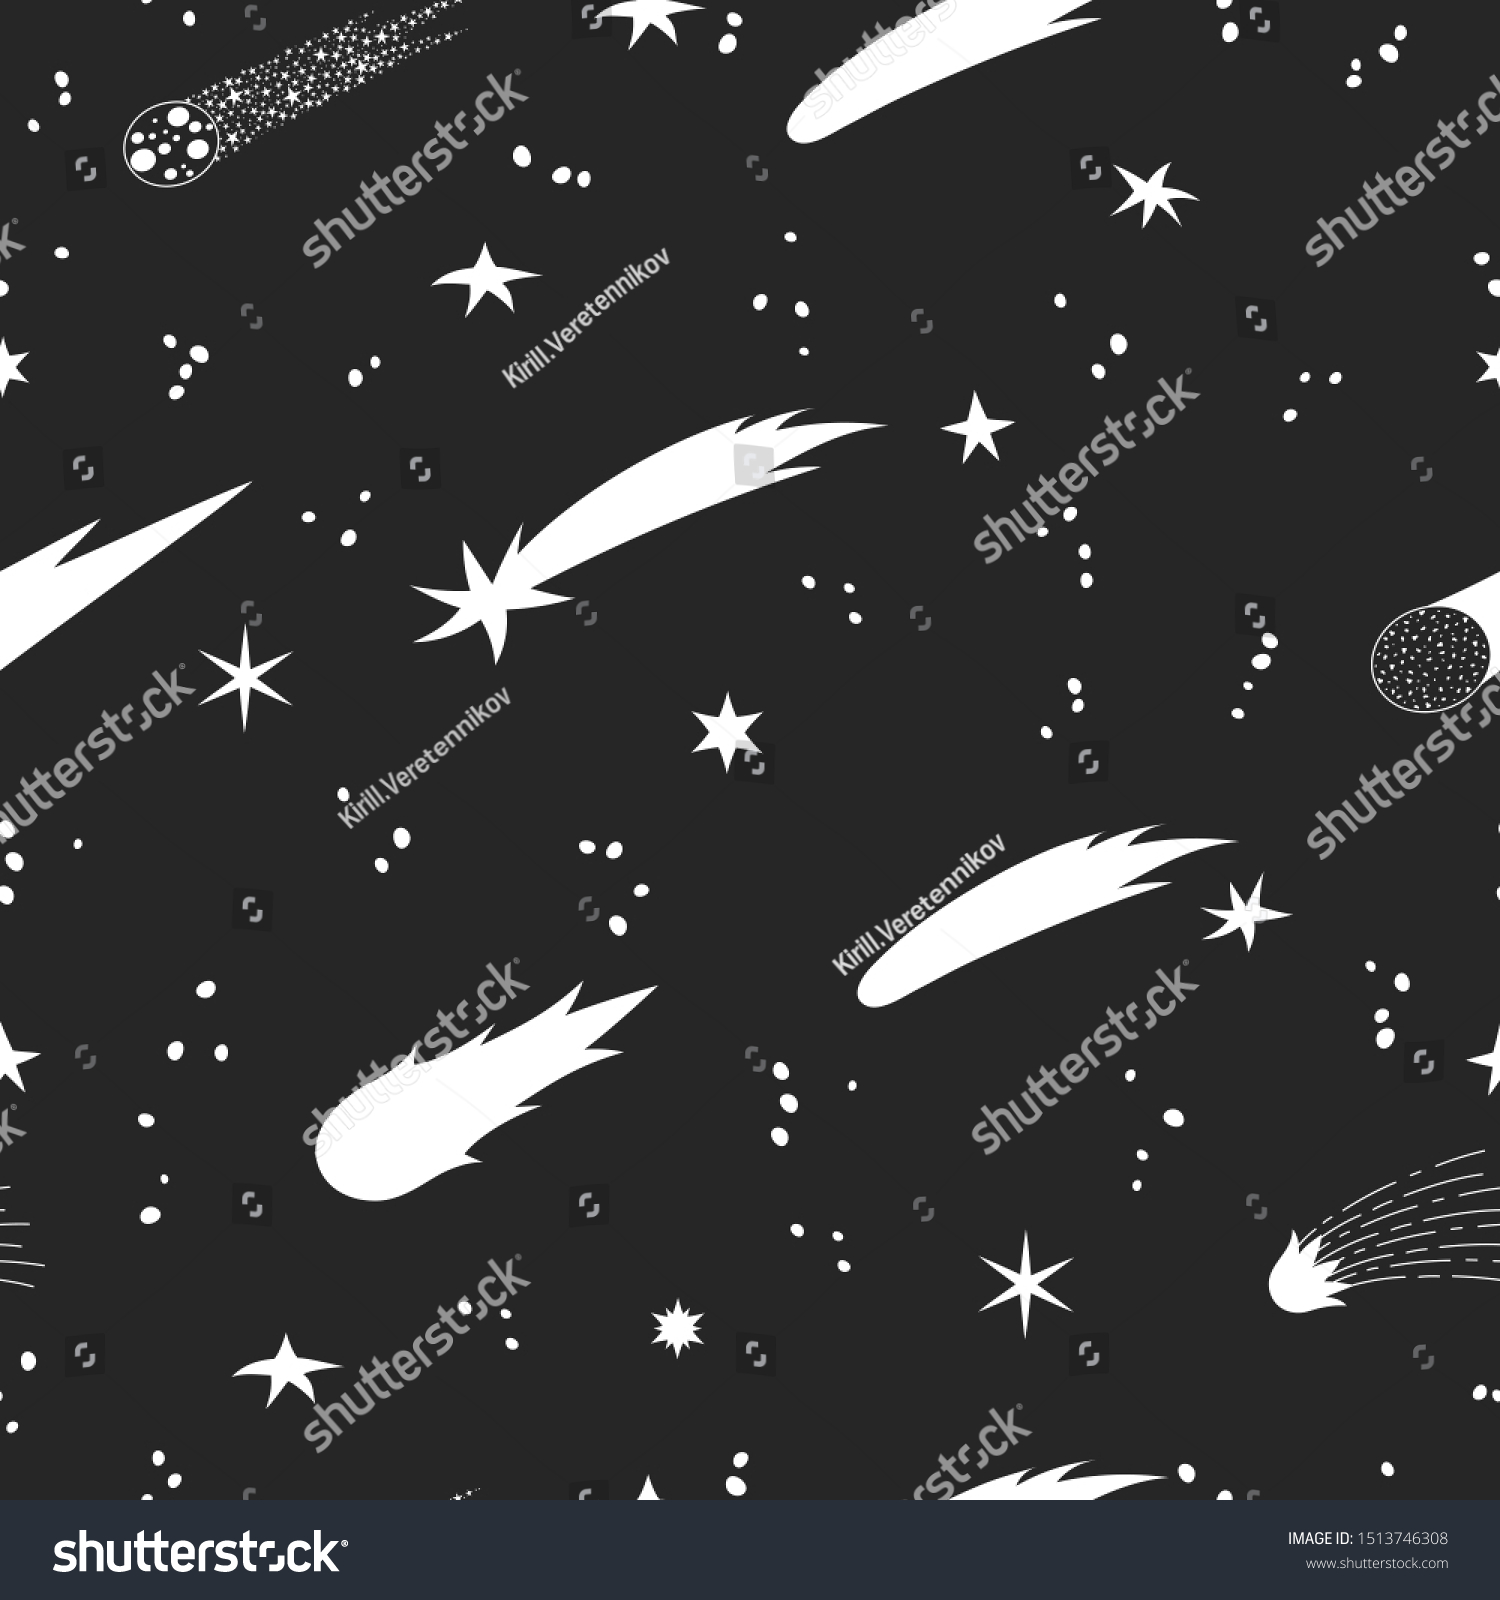 Flowing Star Fabric Background 